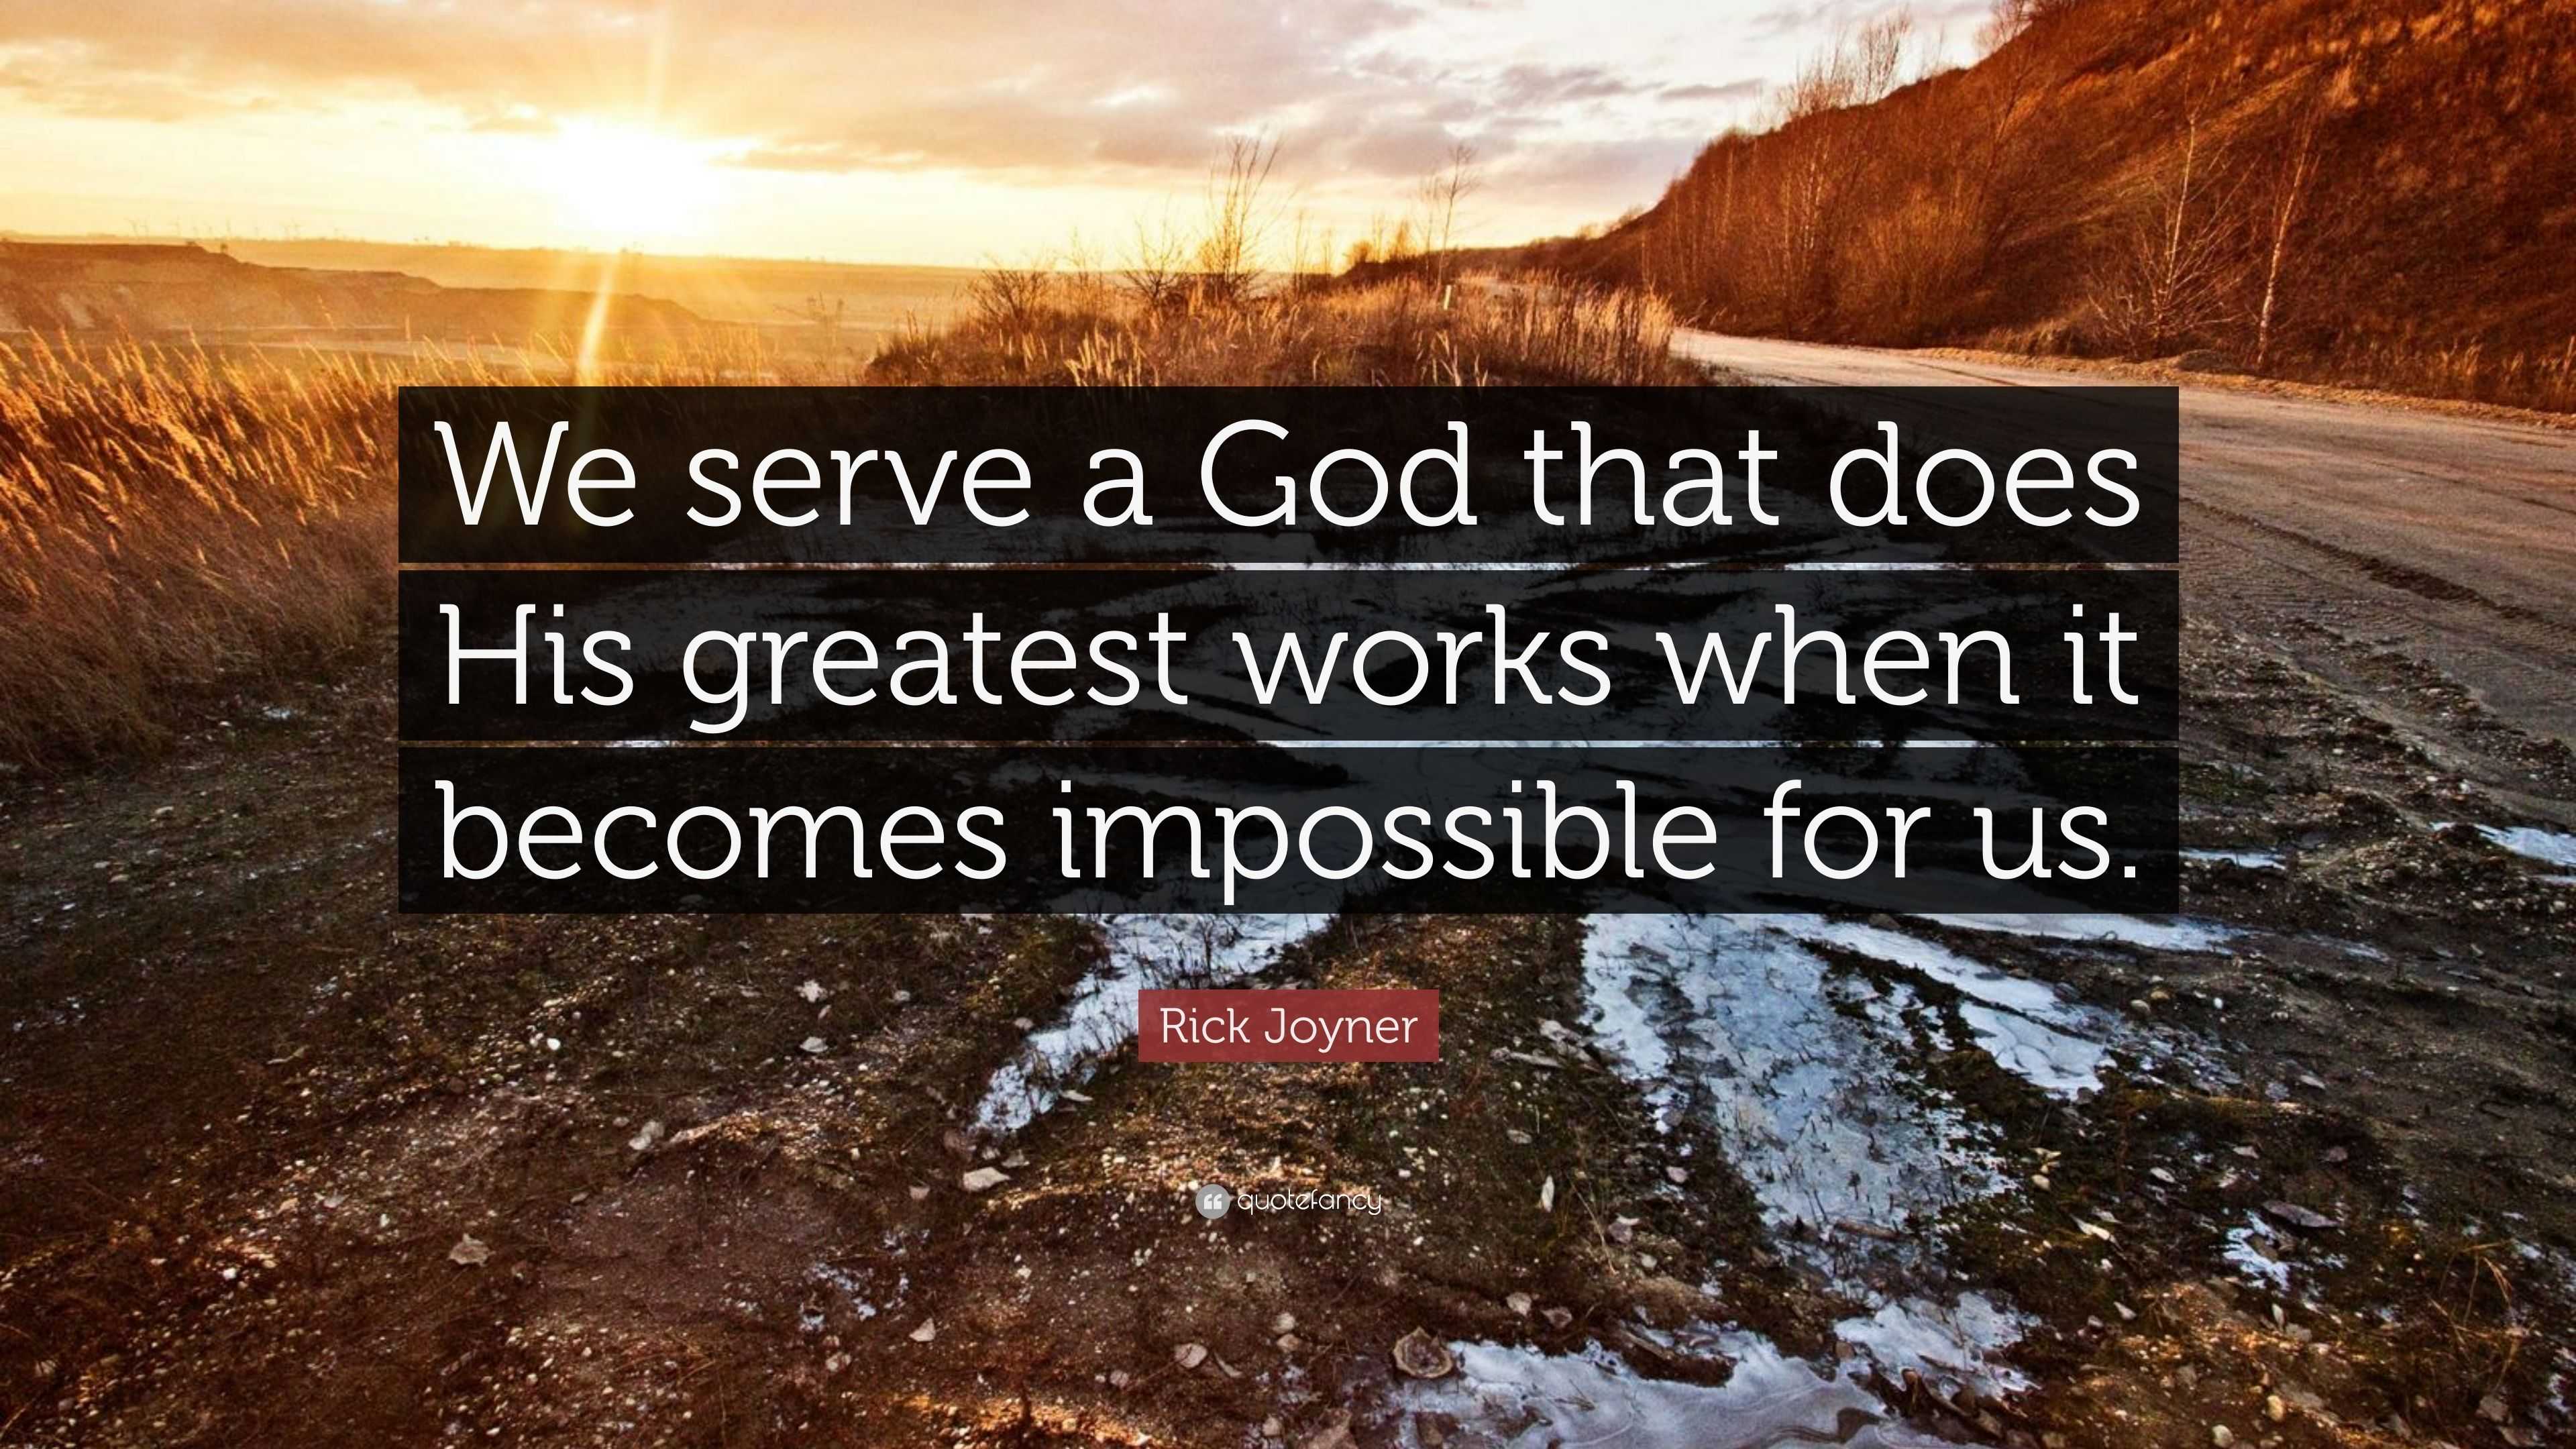 Rick Joyner Quote: “We serve a God that does His greatest works when it ...